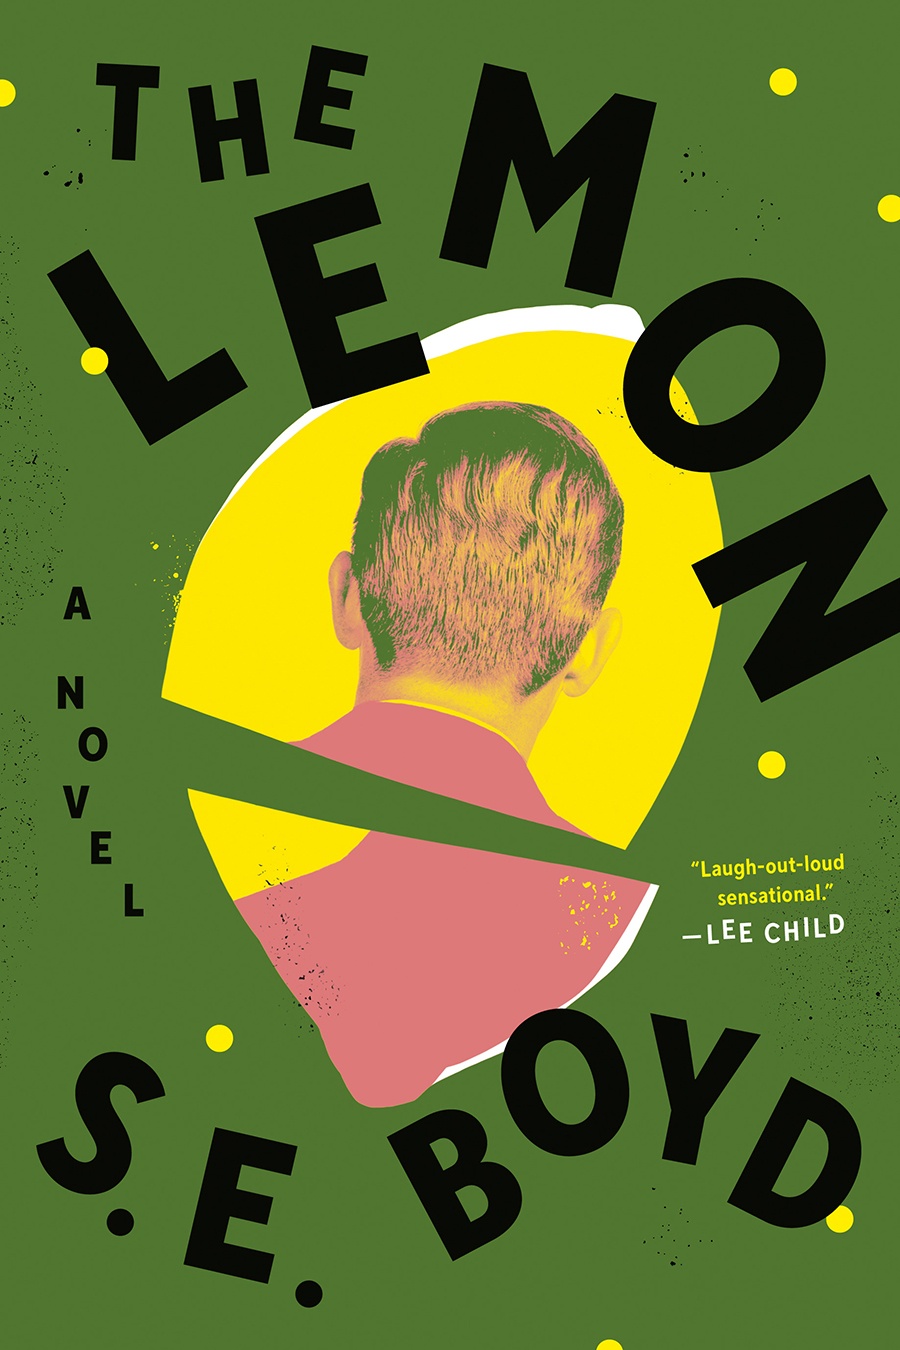 A green book cover features the title, The Lemon, and the author, S.E. Boyd, in a bold black font over an image of a lemon broken in half with a man's head and torso in it, facing away from the camera.